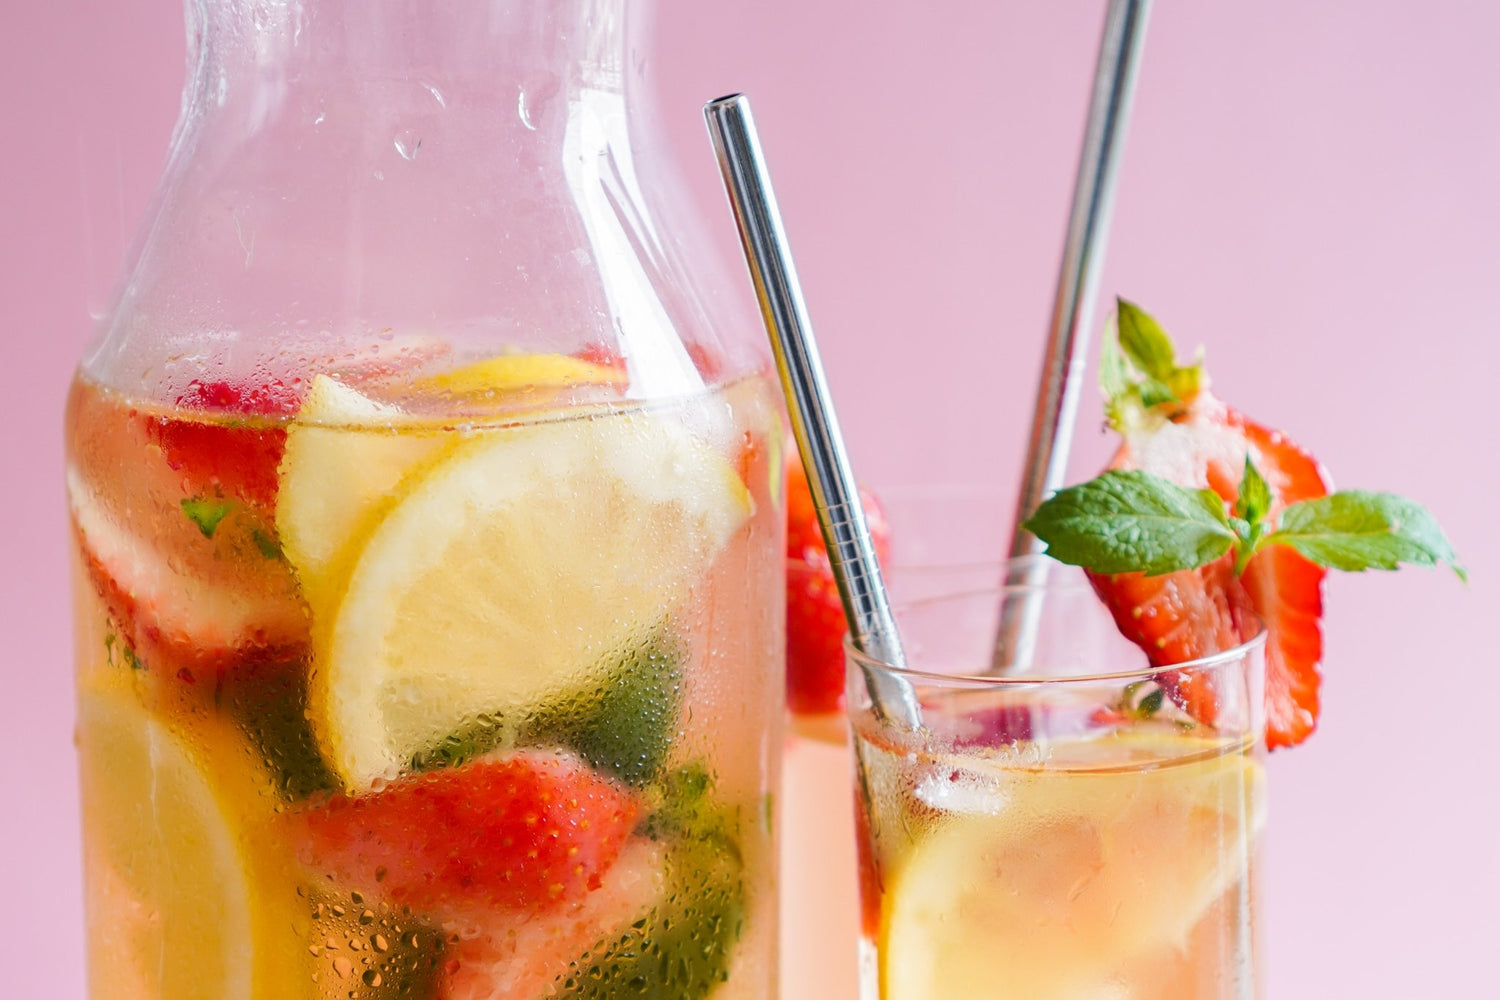 Sip Away Stress With This Calm Down Cooler Recipe - Loose Leaf Tea Market